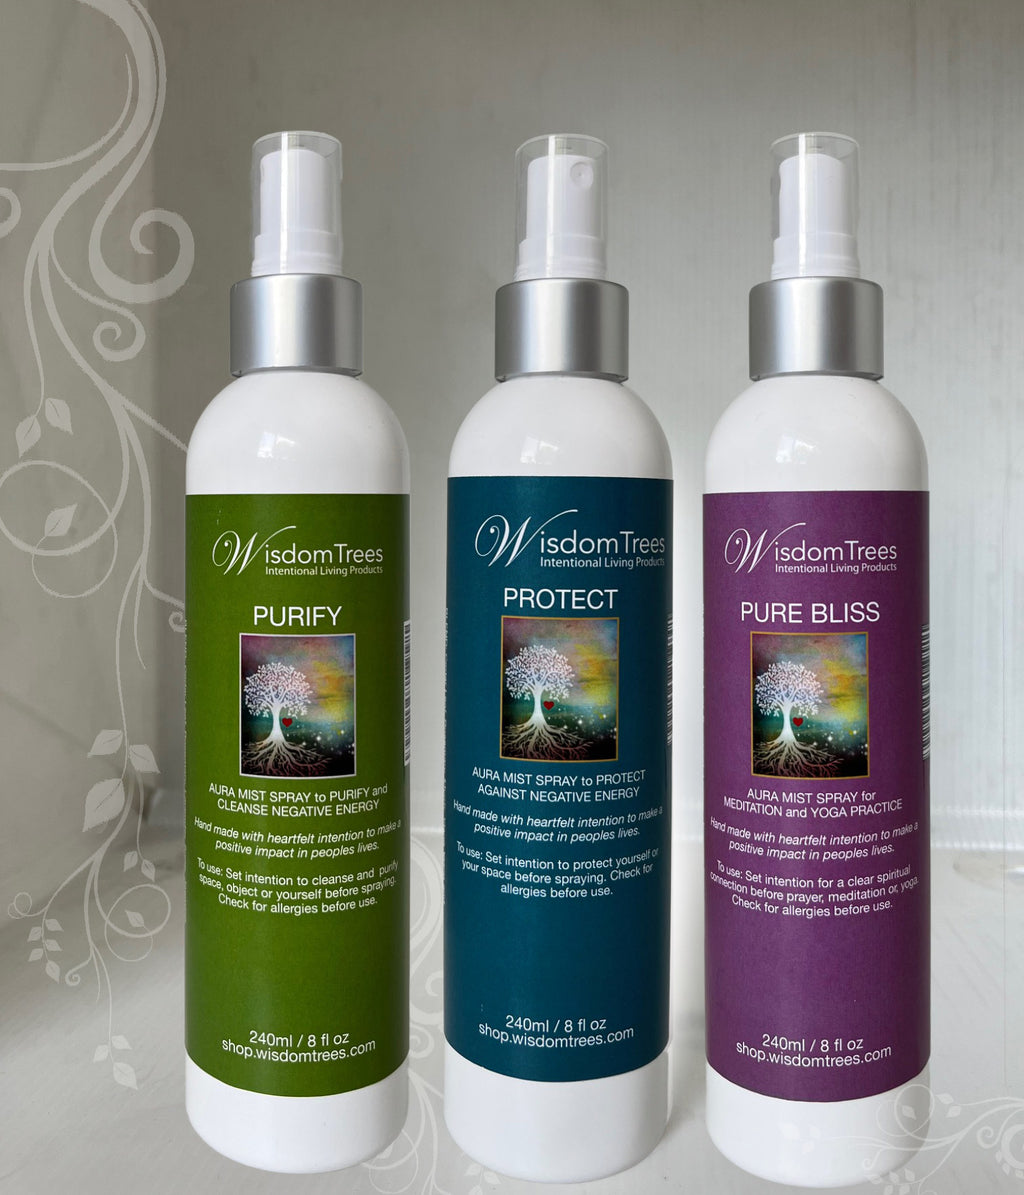 Purify, Protect & Pure Bliss Trilogy - 240ml set